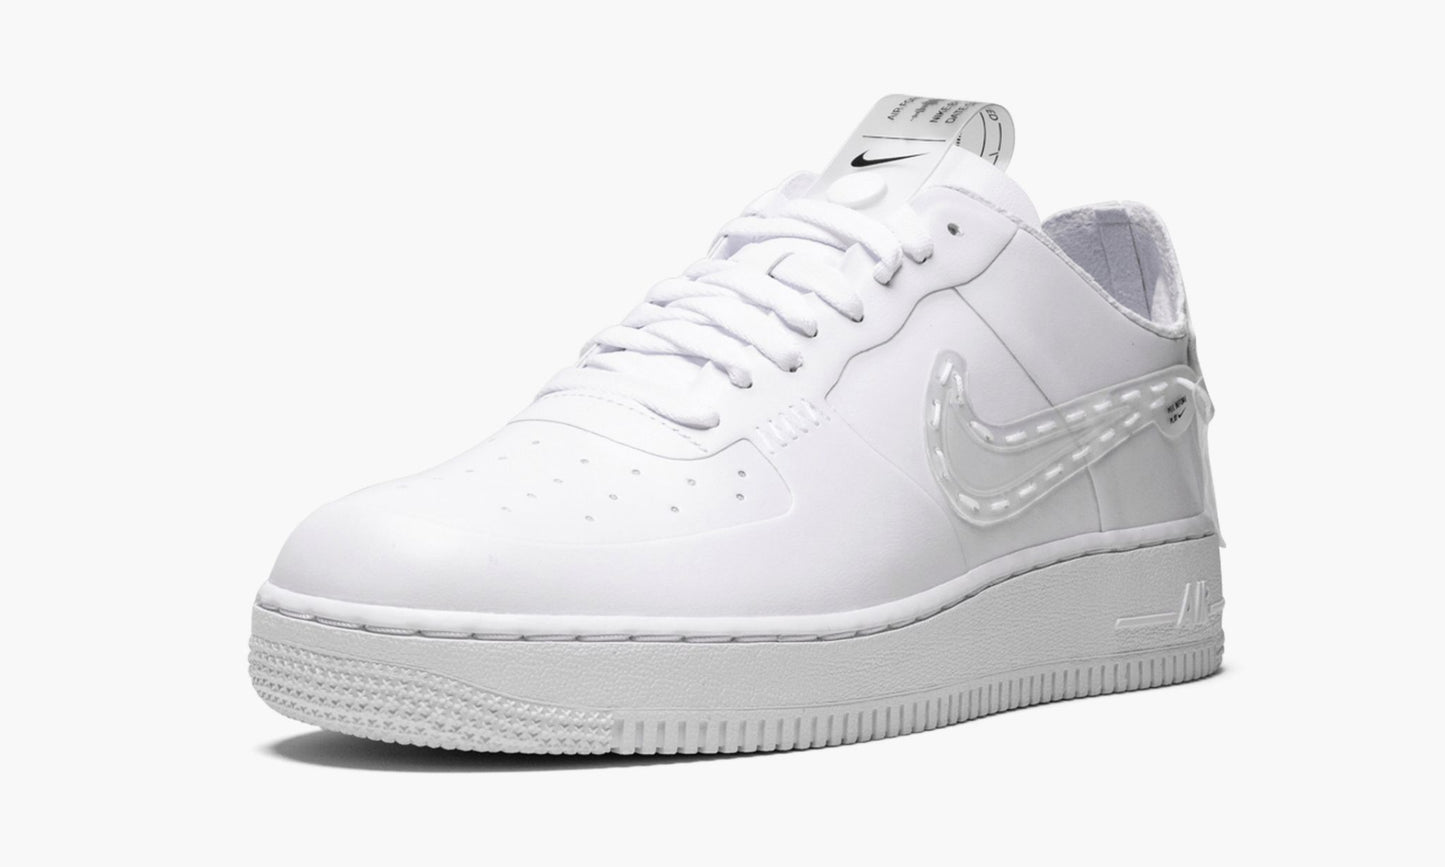 Air Force 1 Low NCXL "Noise Cancellation"